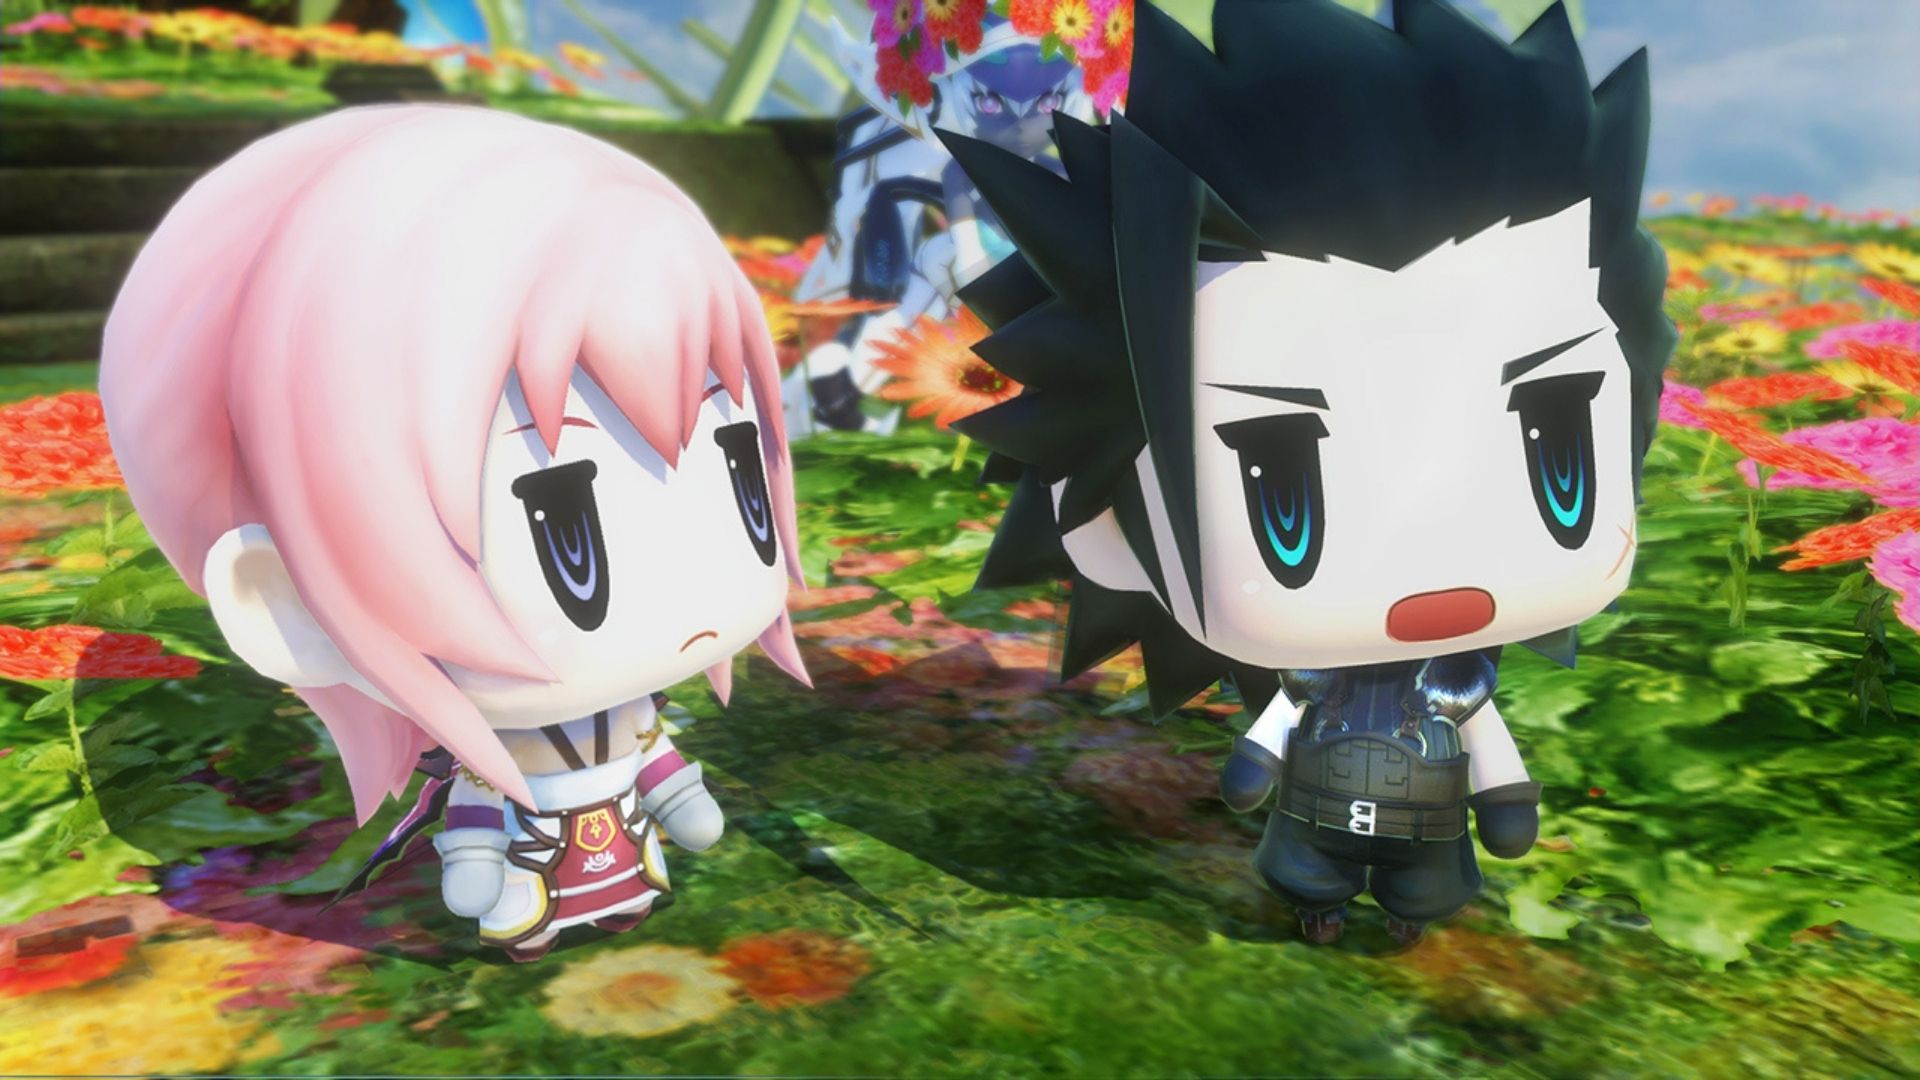 A screenshot from World of Final Fantasy, a game like Pokémon, showing two chibi characters (tiny body, giant head), one with black hair, one with pink, looking into the distance.